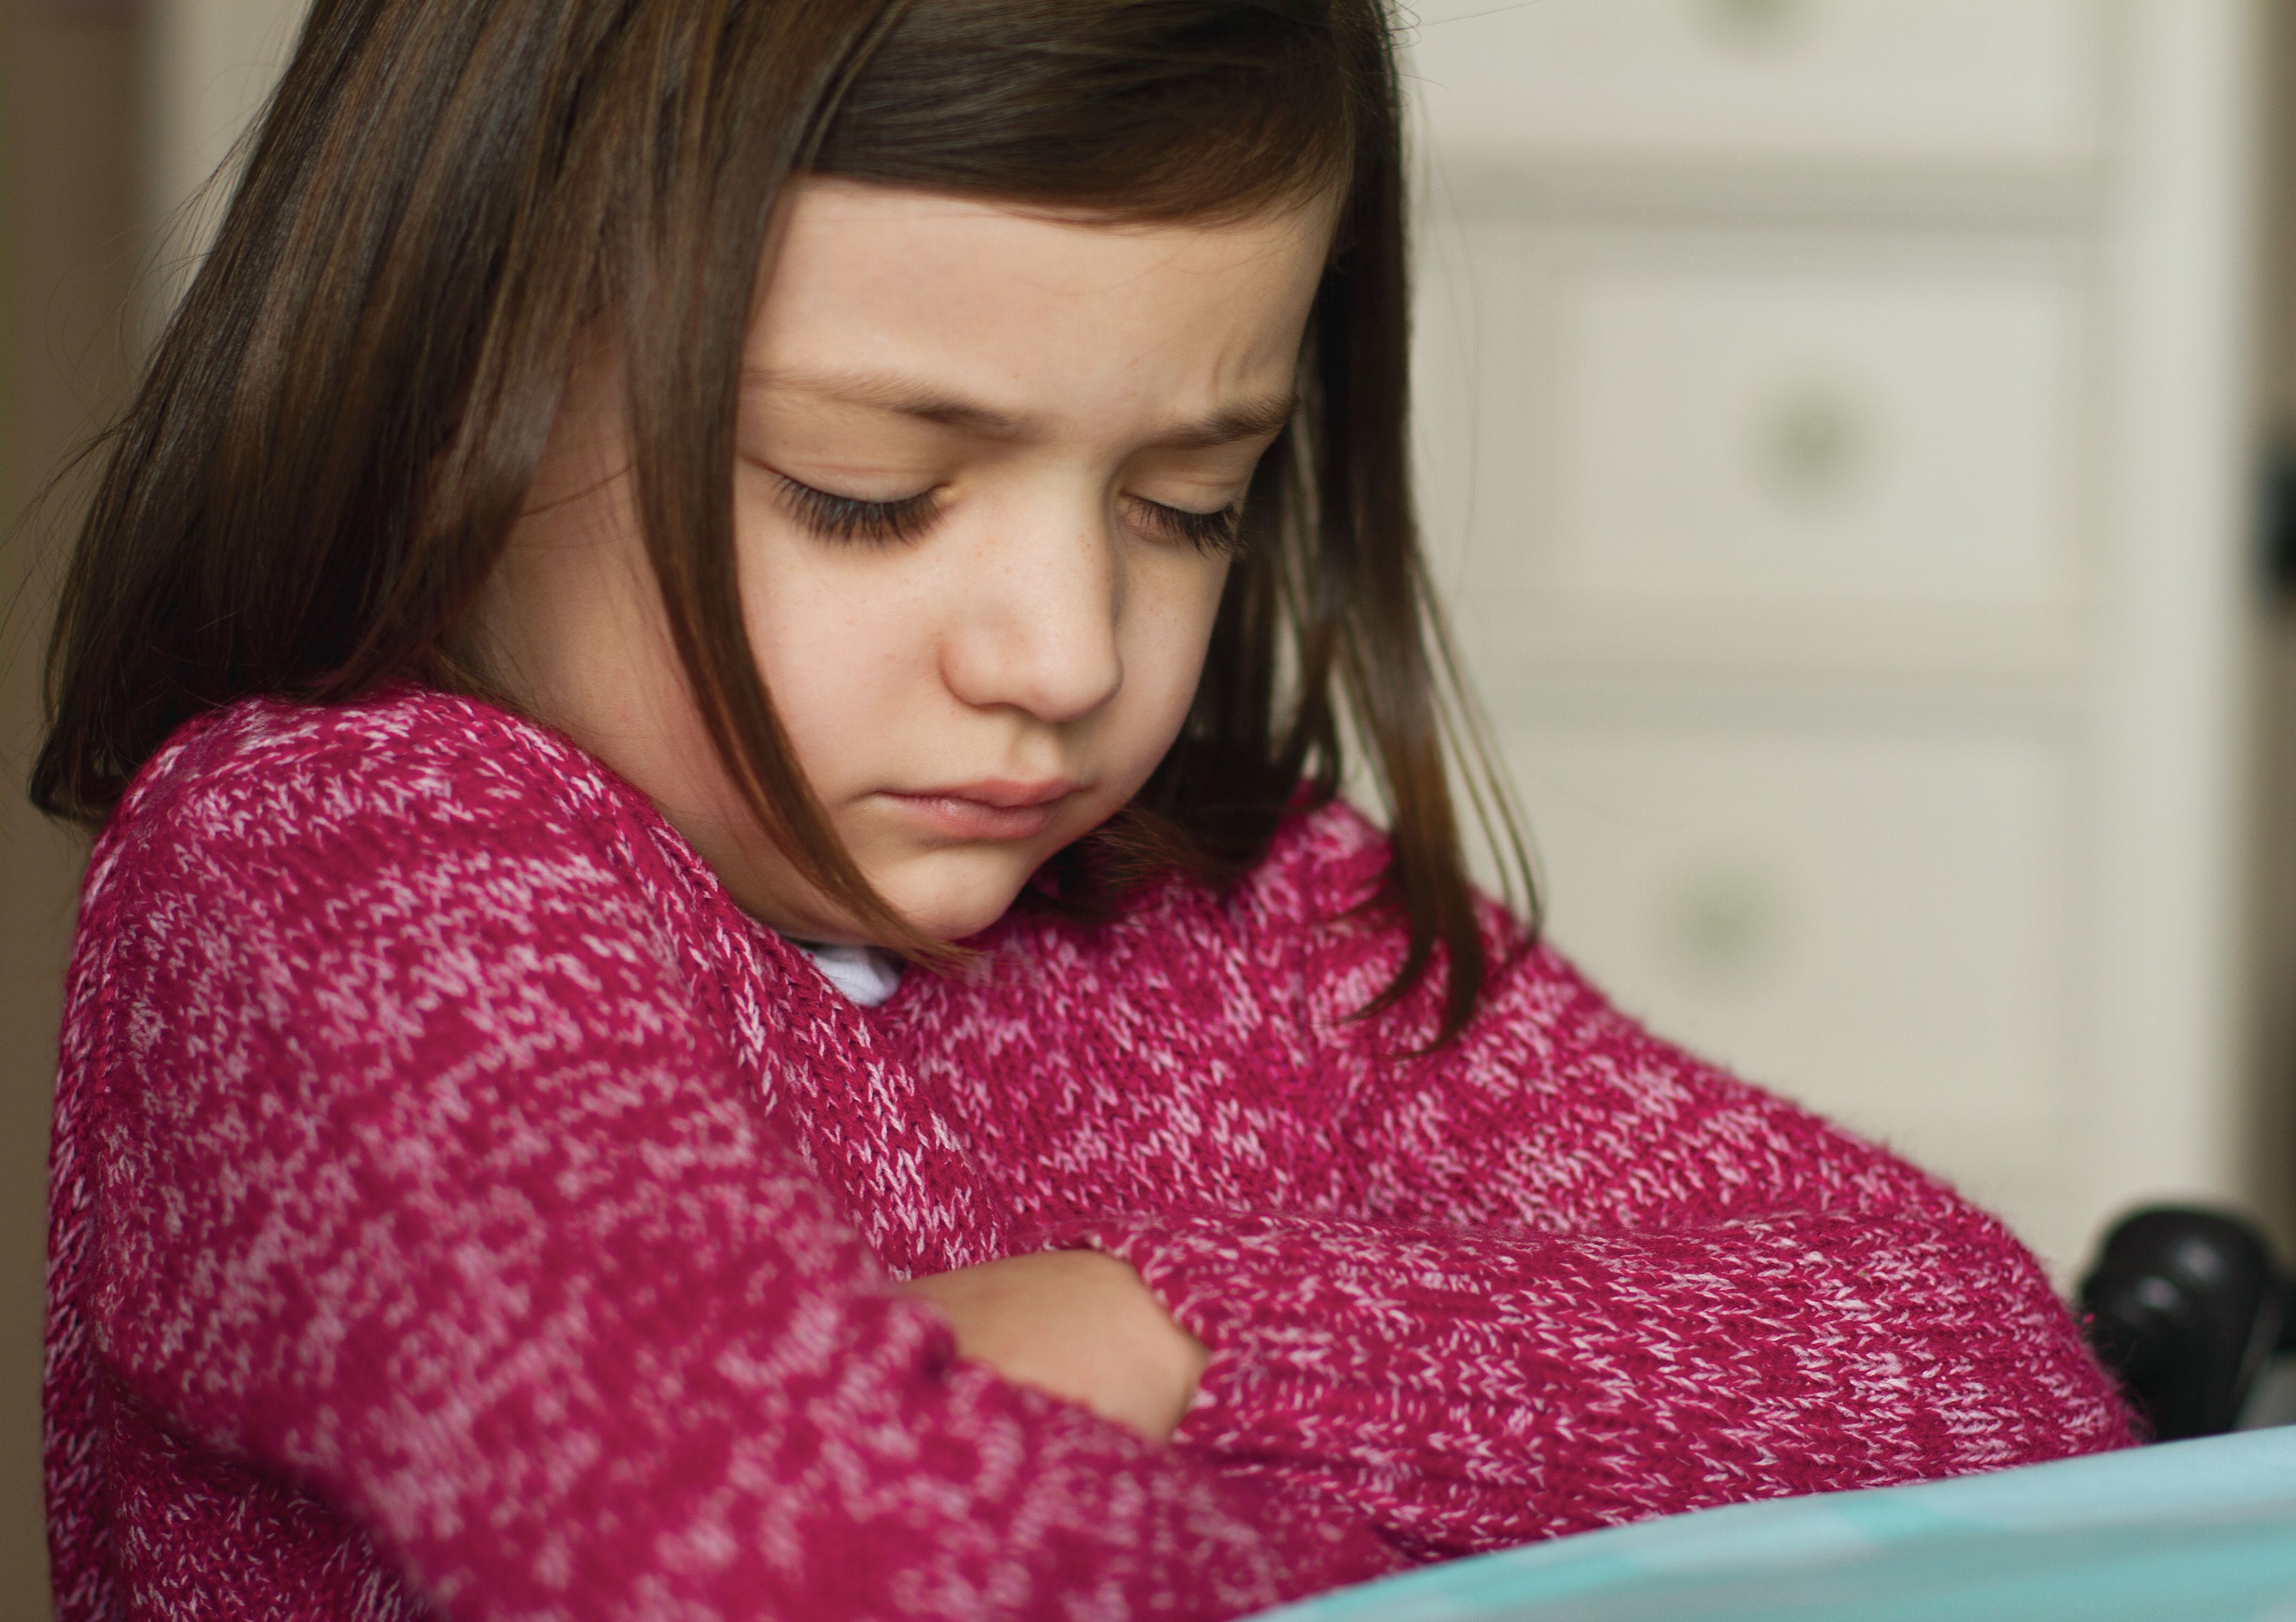 A young girl in a pink sweater folds her arms and prays.